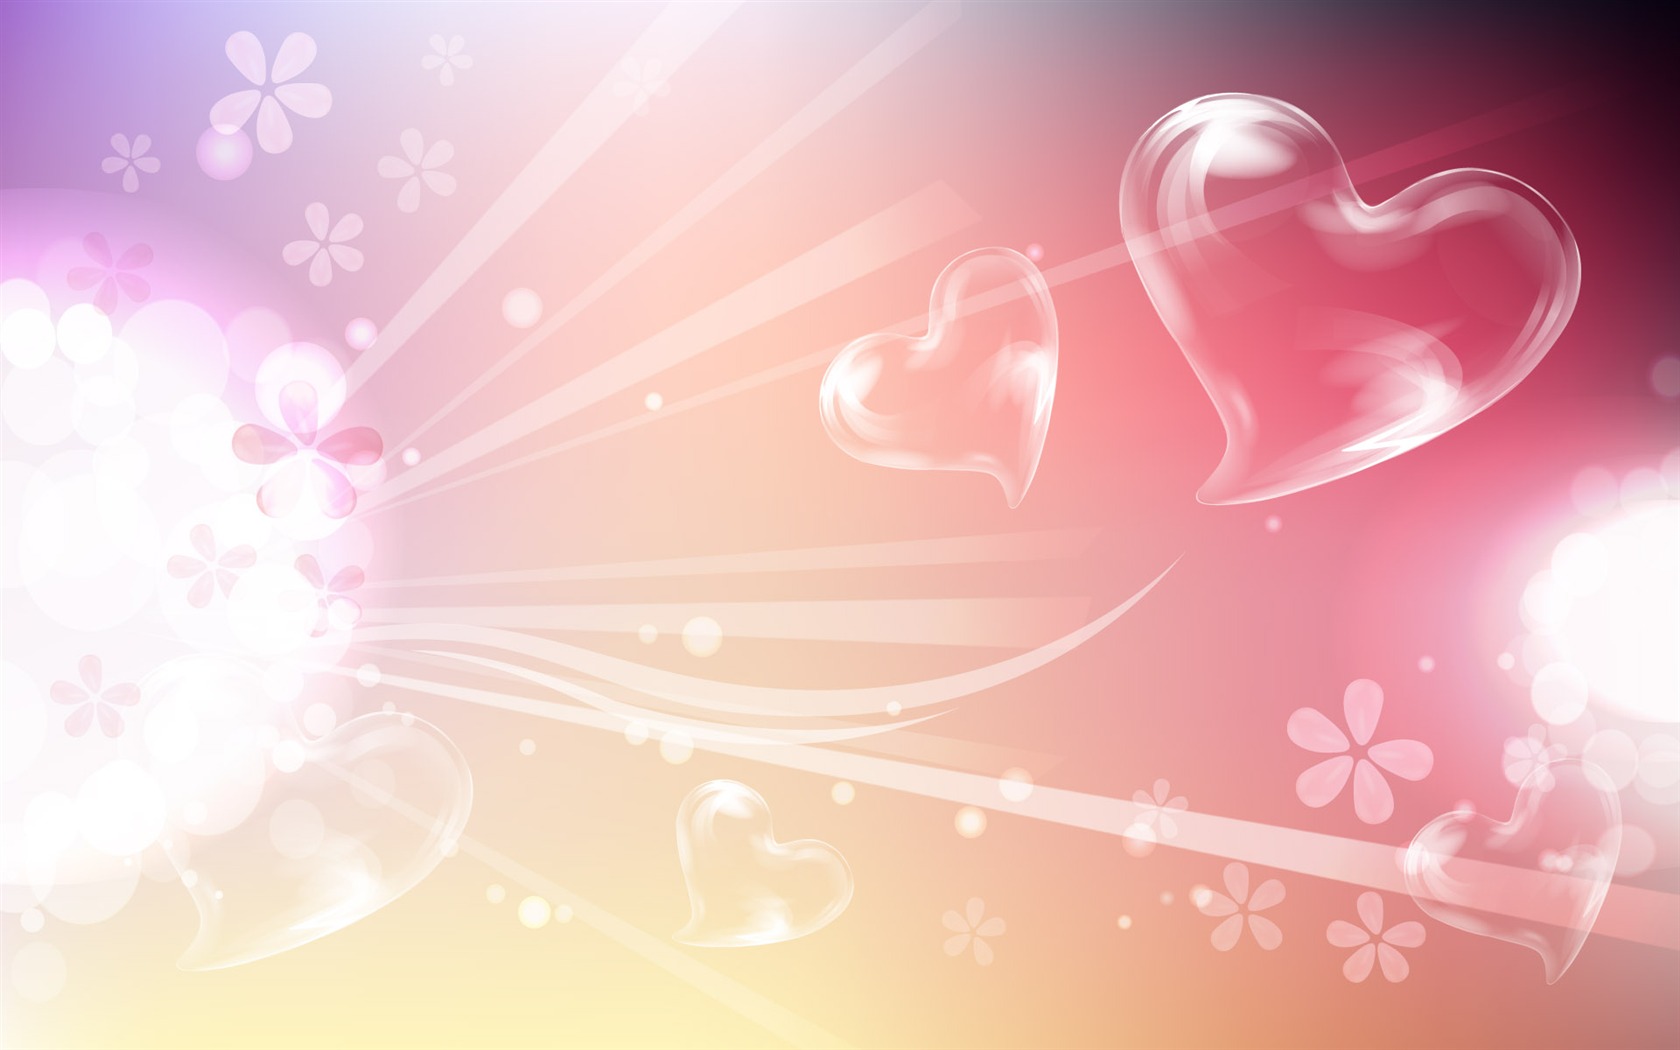 Valentine's Day Love Theme Wallpapers (2) #3 - 1680x1050